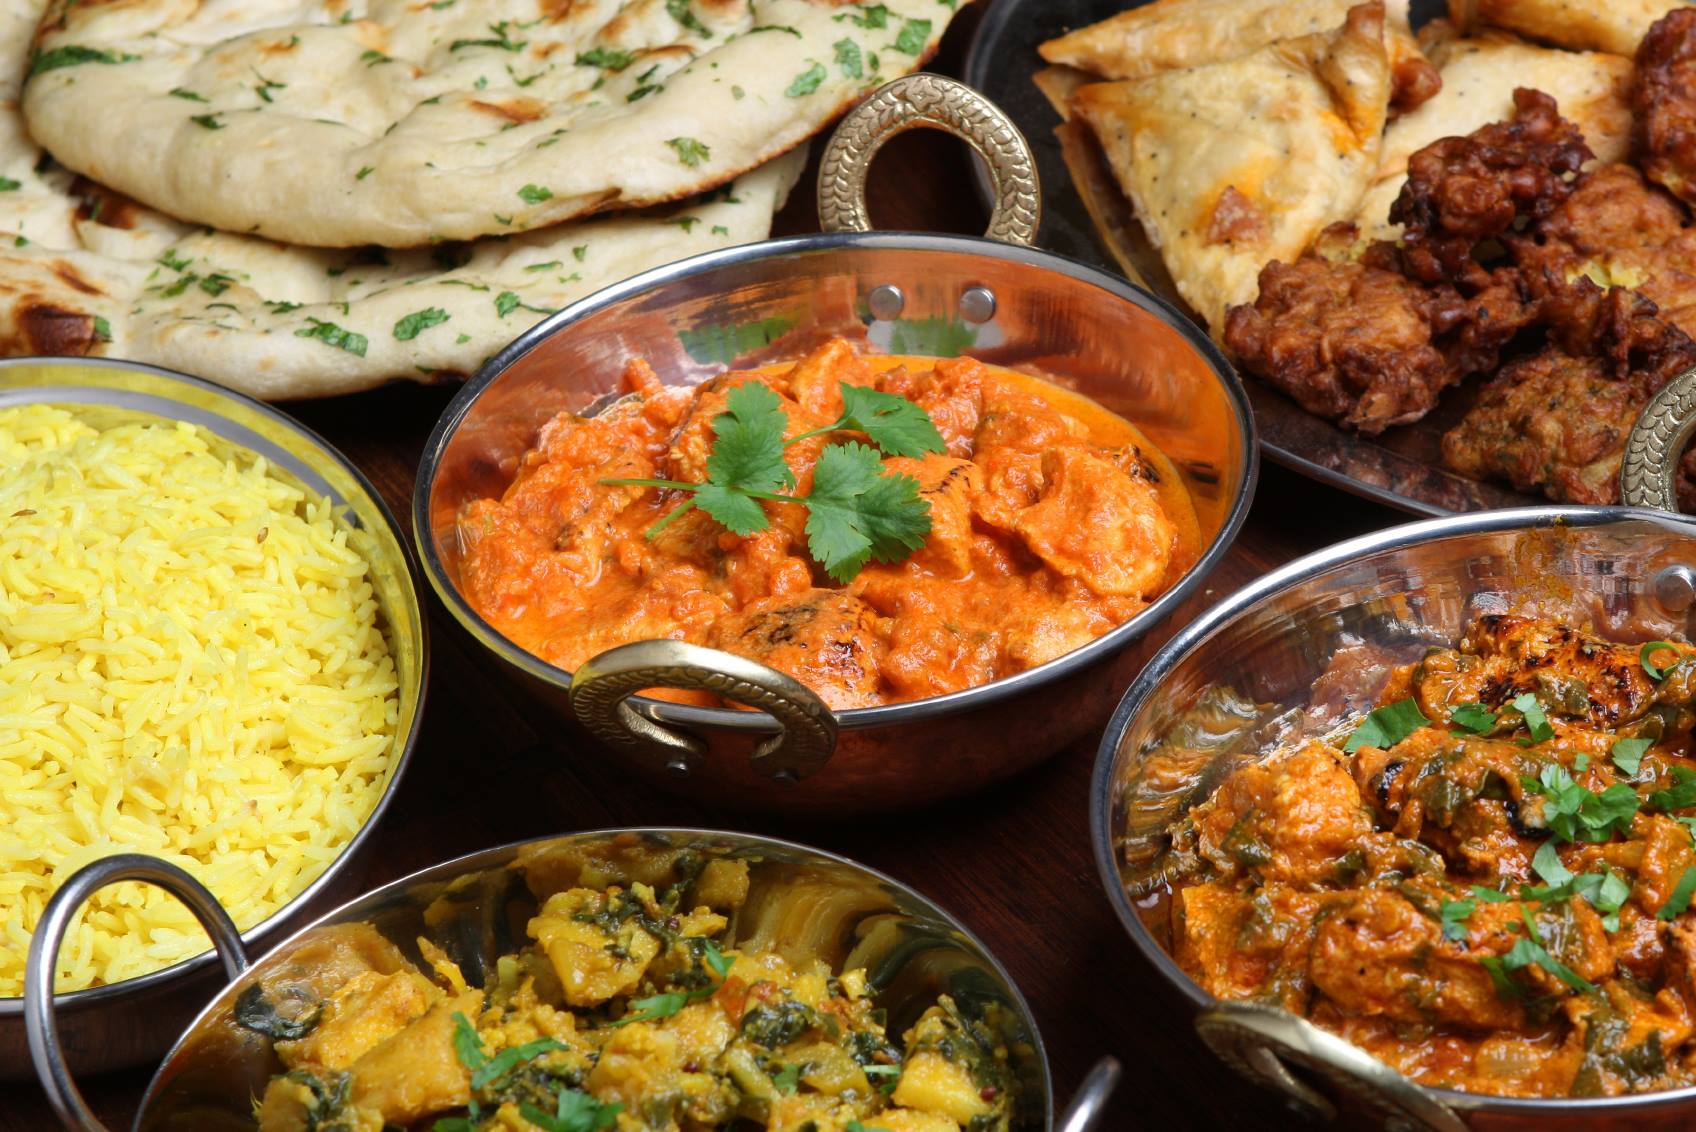 Featured image for “Taste of India”